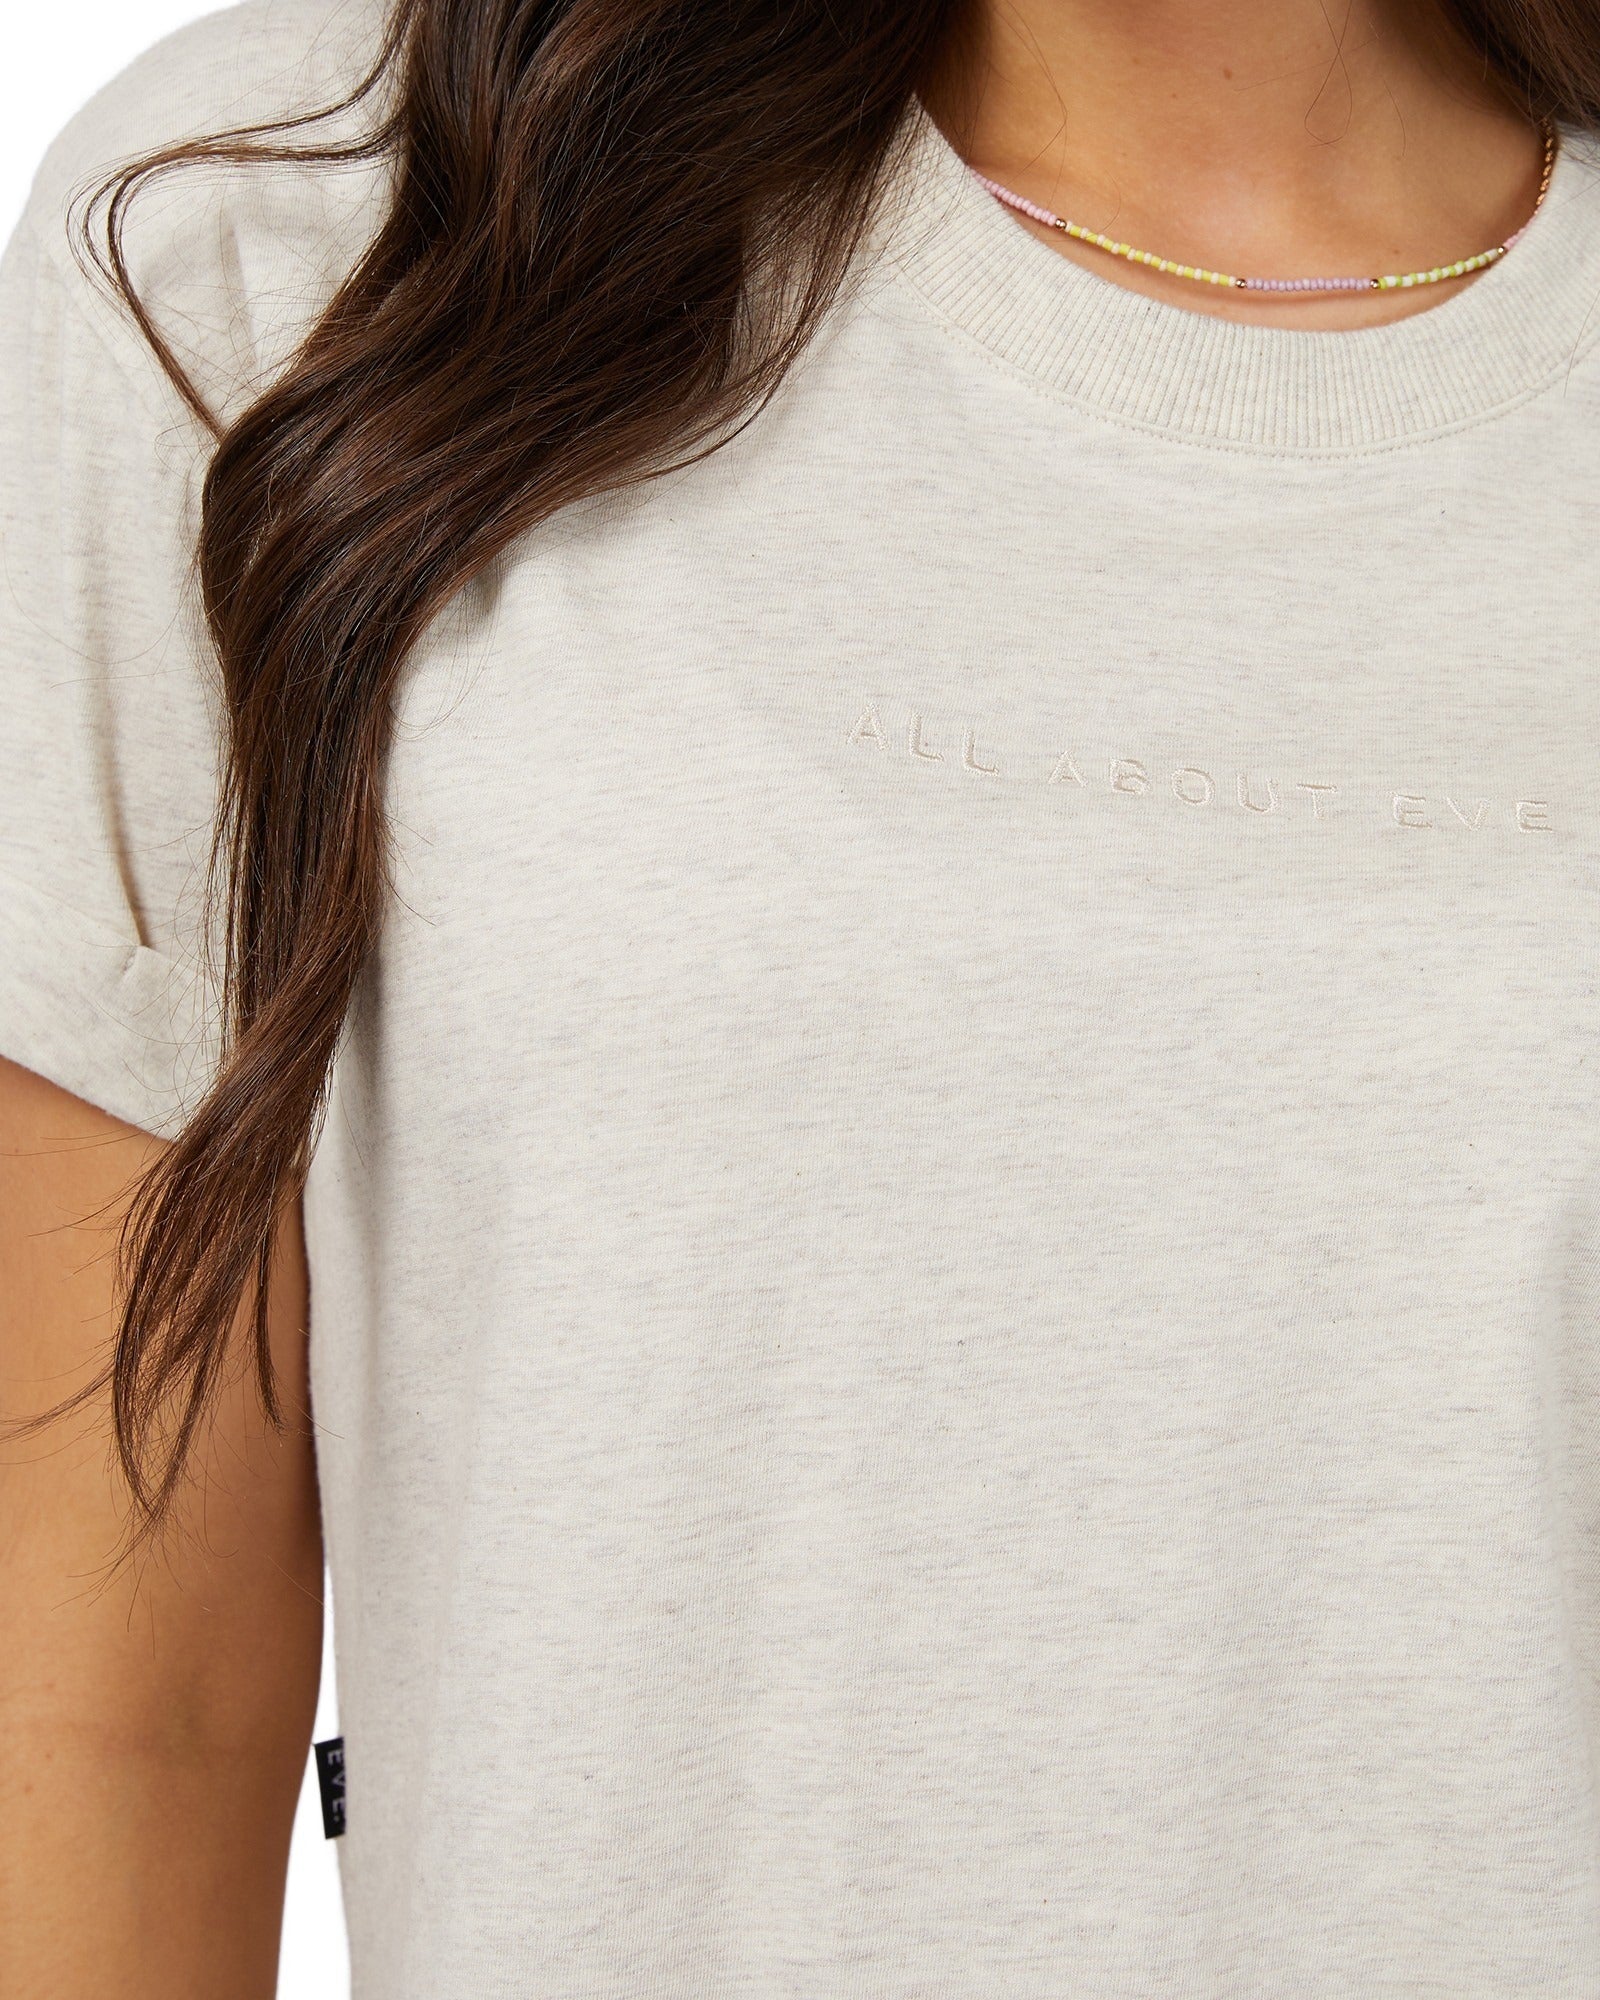 All About Eve - Washed Tee - Oat